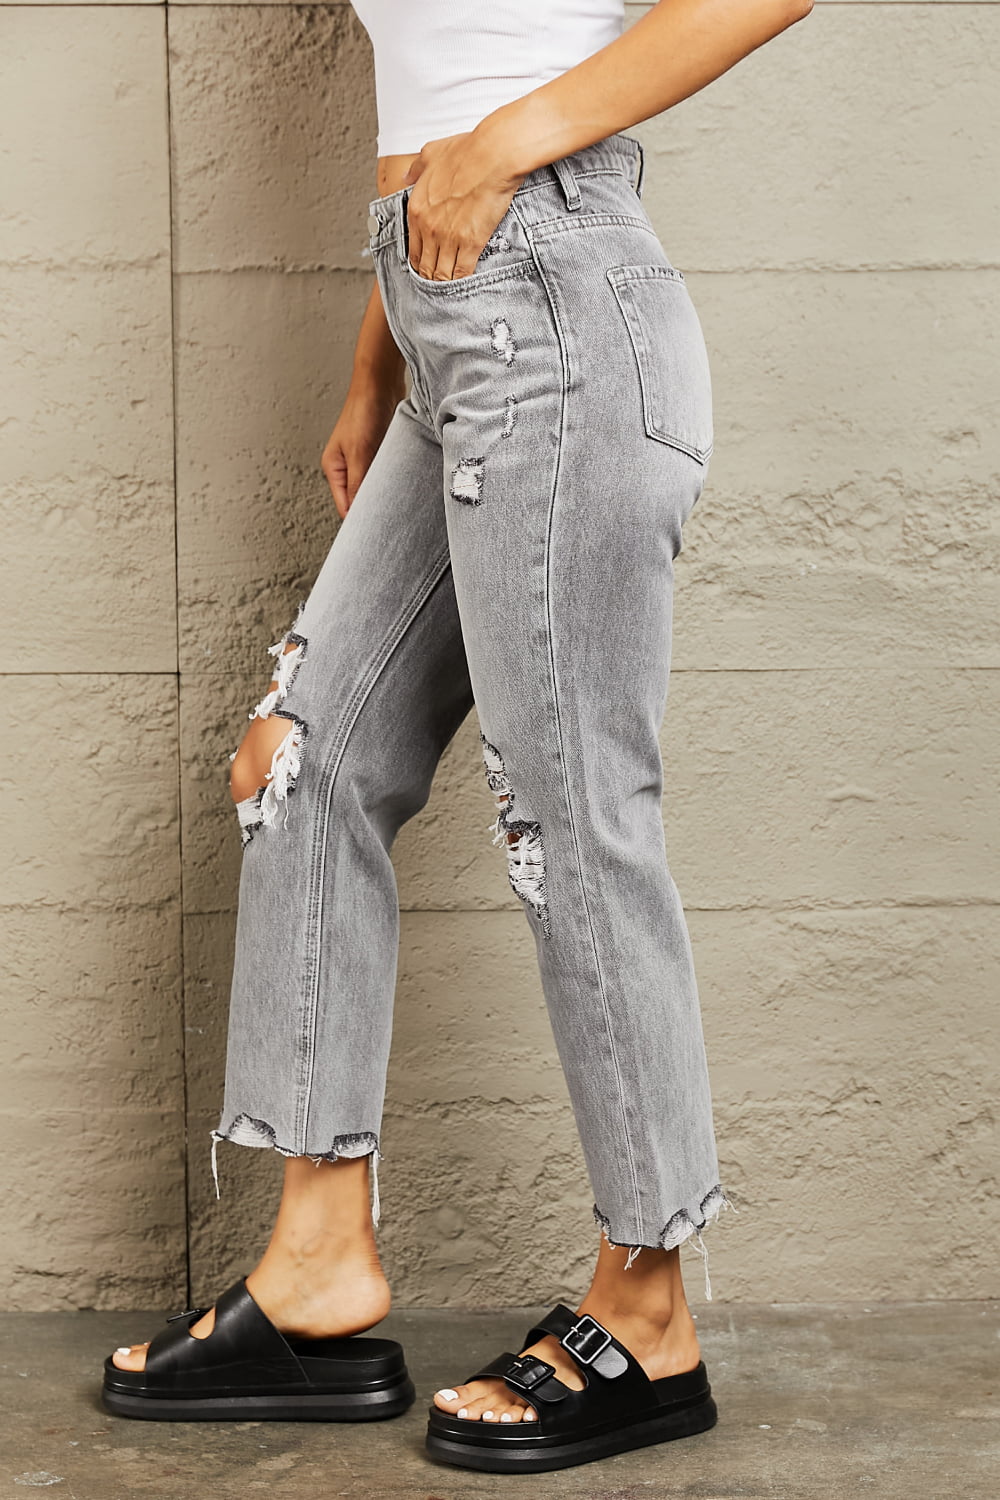 These jeans are crafted from premium quality denim, ensuring a soft and stretchy fit that flatters your curves while providing all-day comfort. The high waist design offers a flattering silhouette, while the trendy distressed details add a touch of edginess to your outfit. 